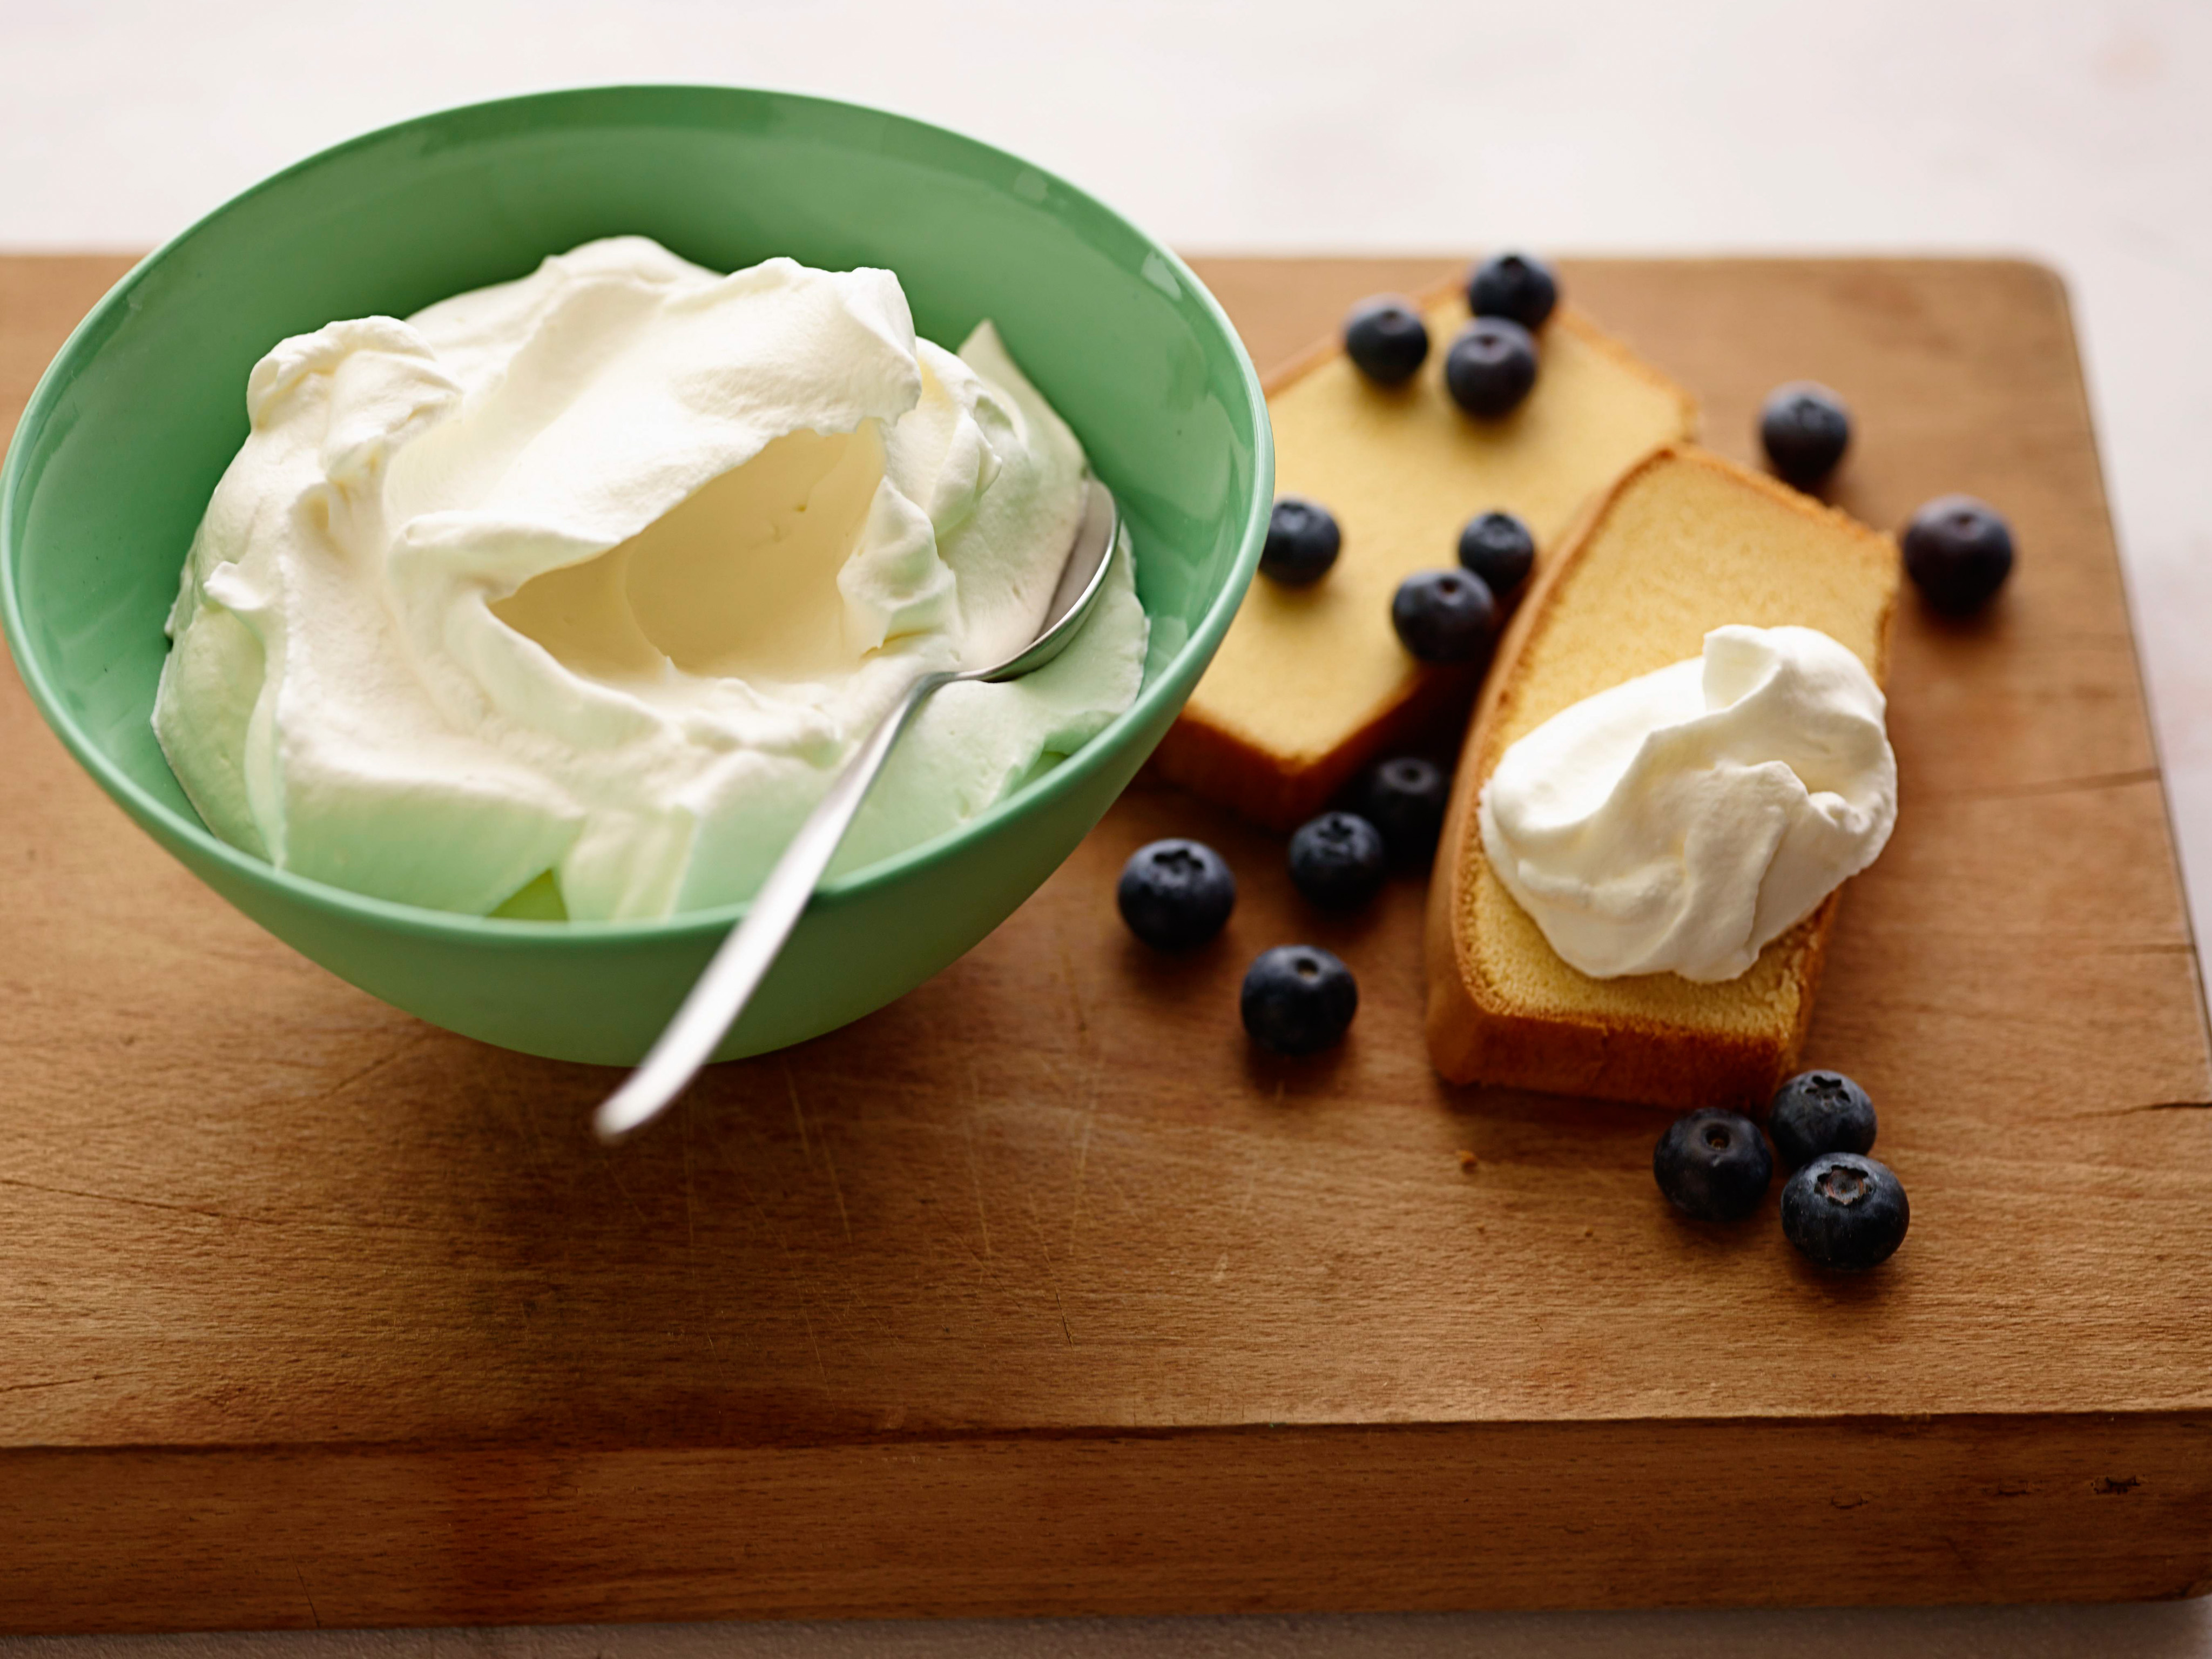 https://www.foodnetwork.com/content/dam/images/food/fullset/2014/7/9/1/FN_How-to-Whipped-Cream-04_s4x3.jpg